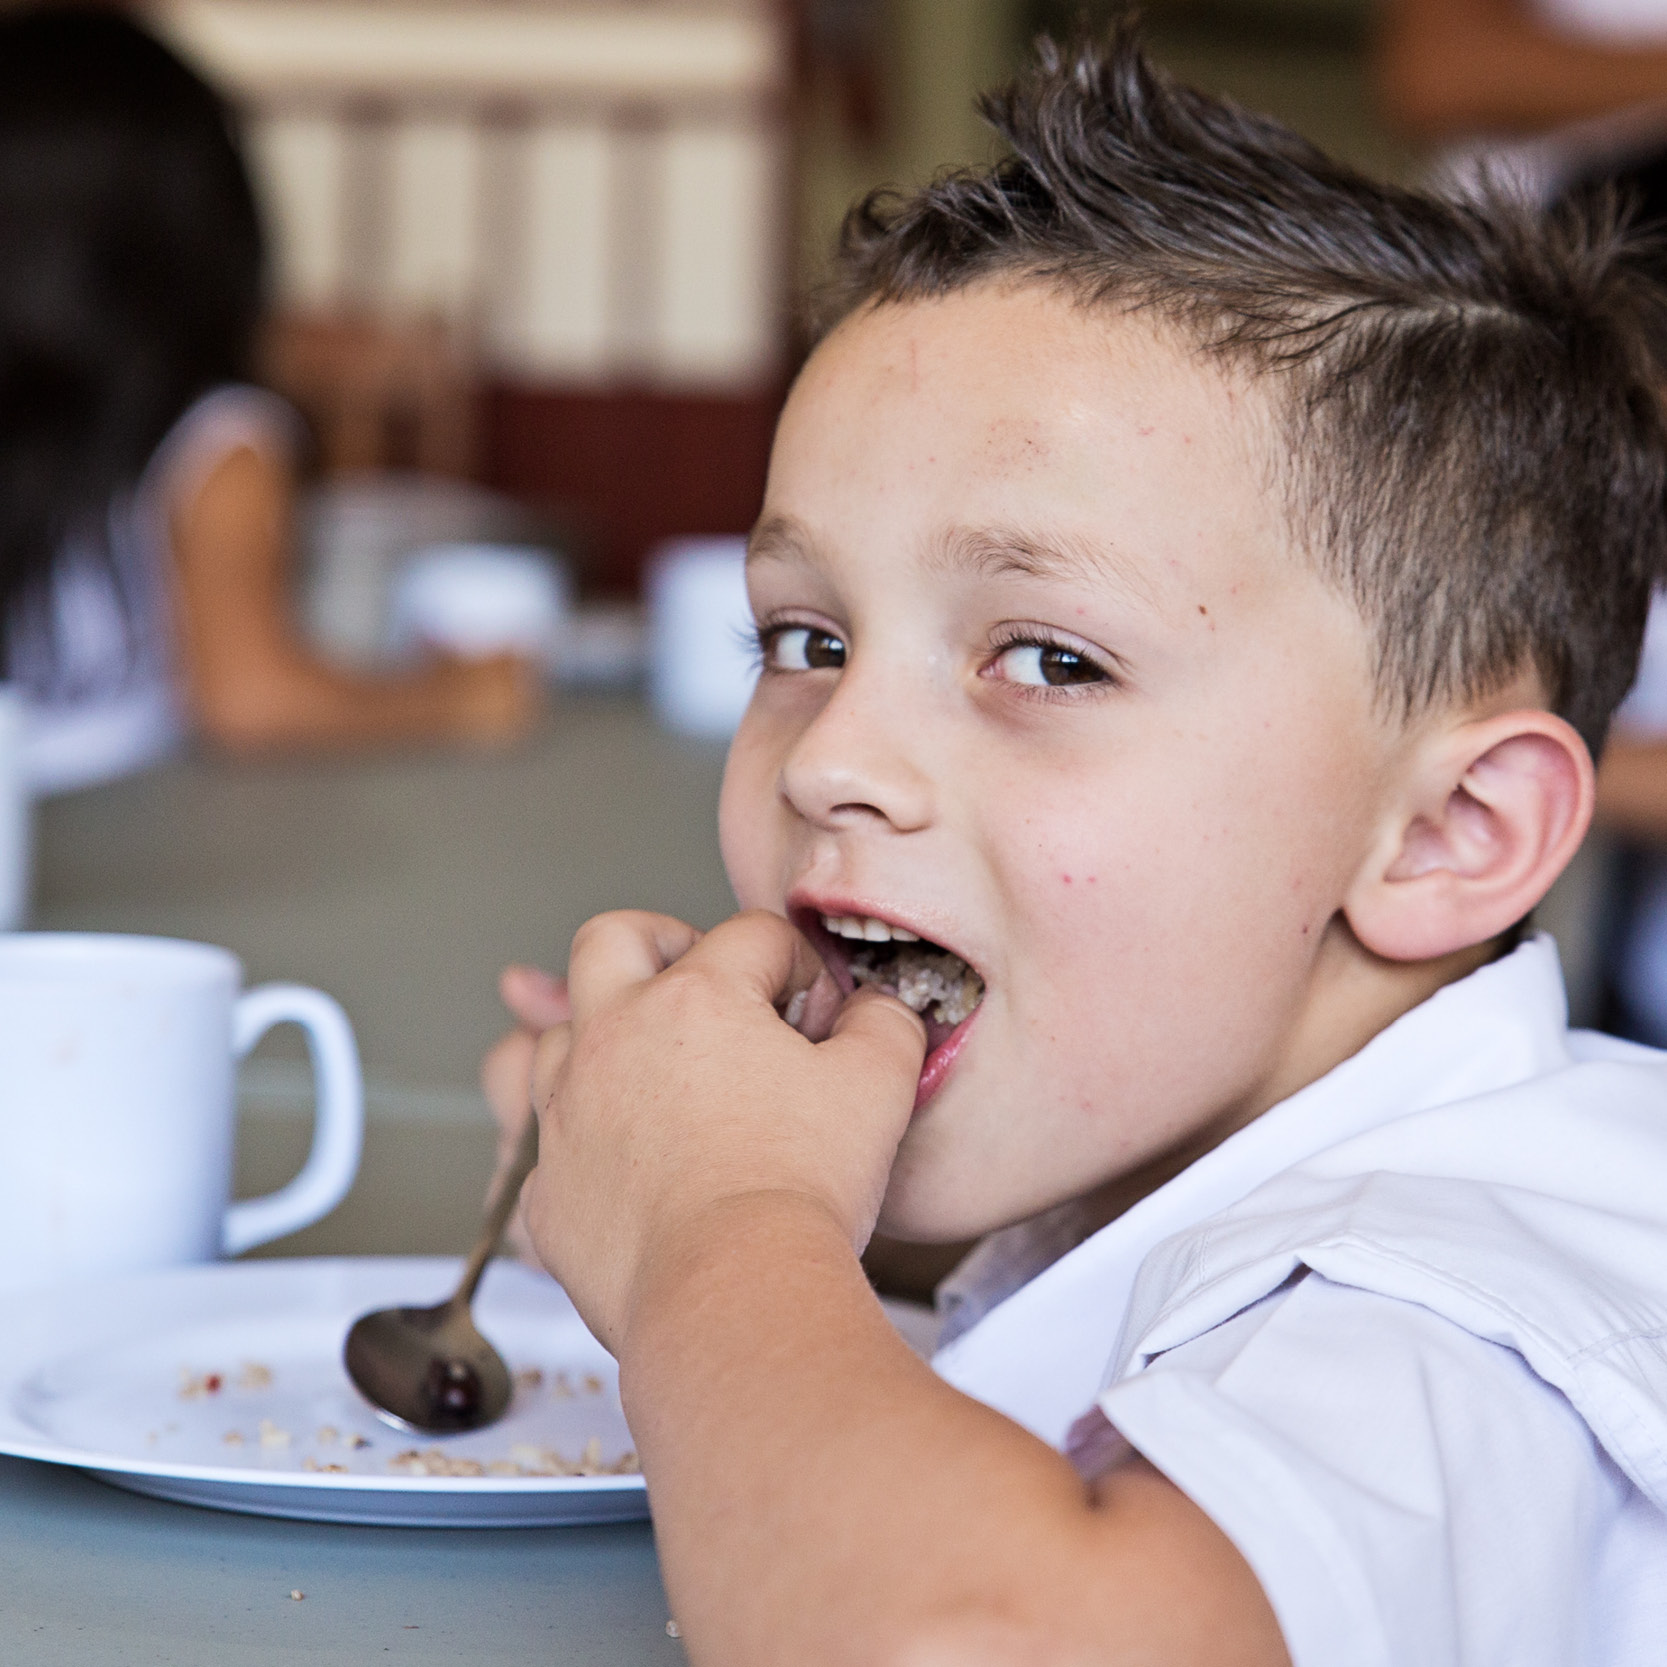 Photo of boy in Costa Rica eating lunch at school